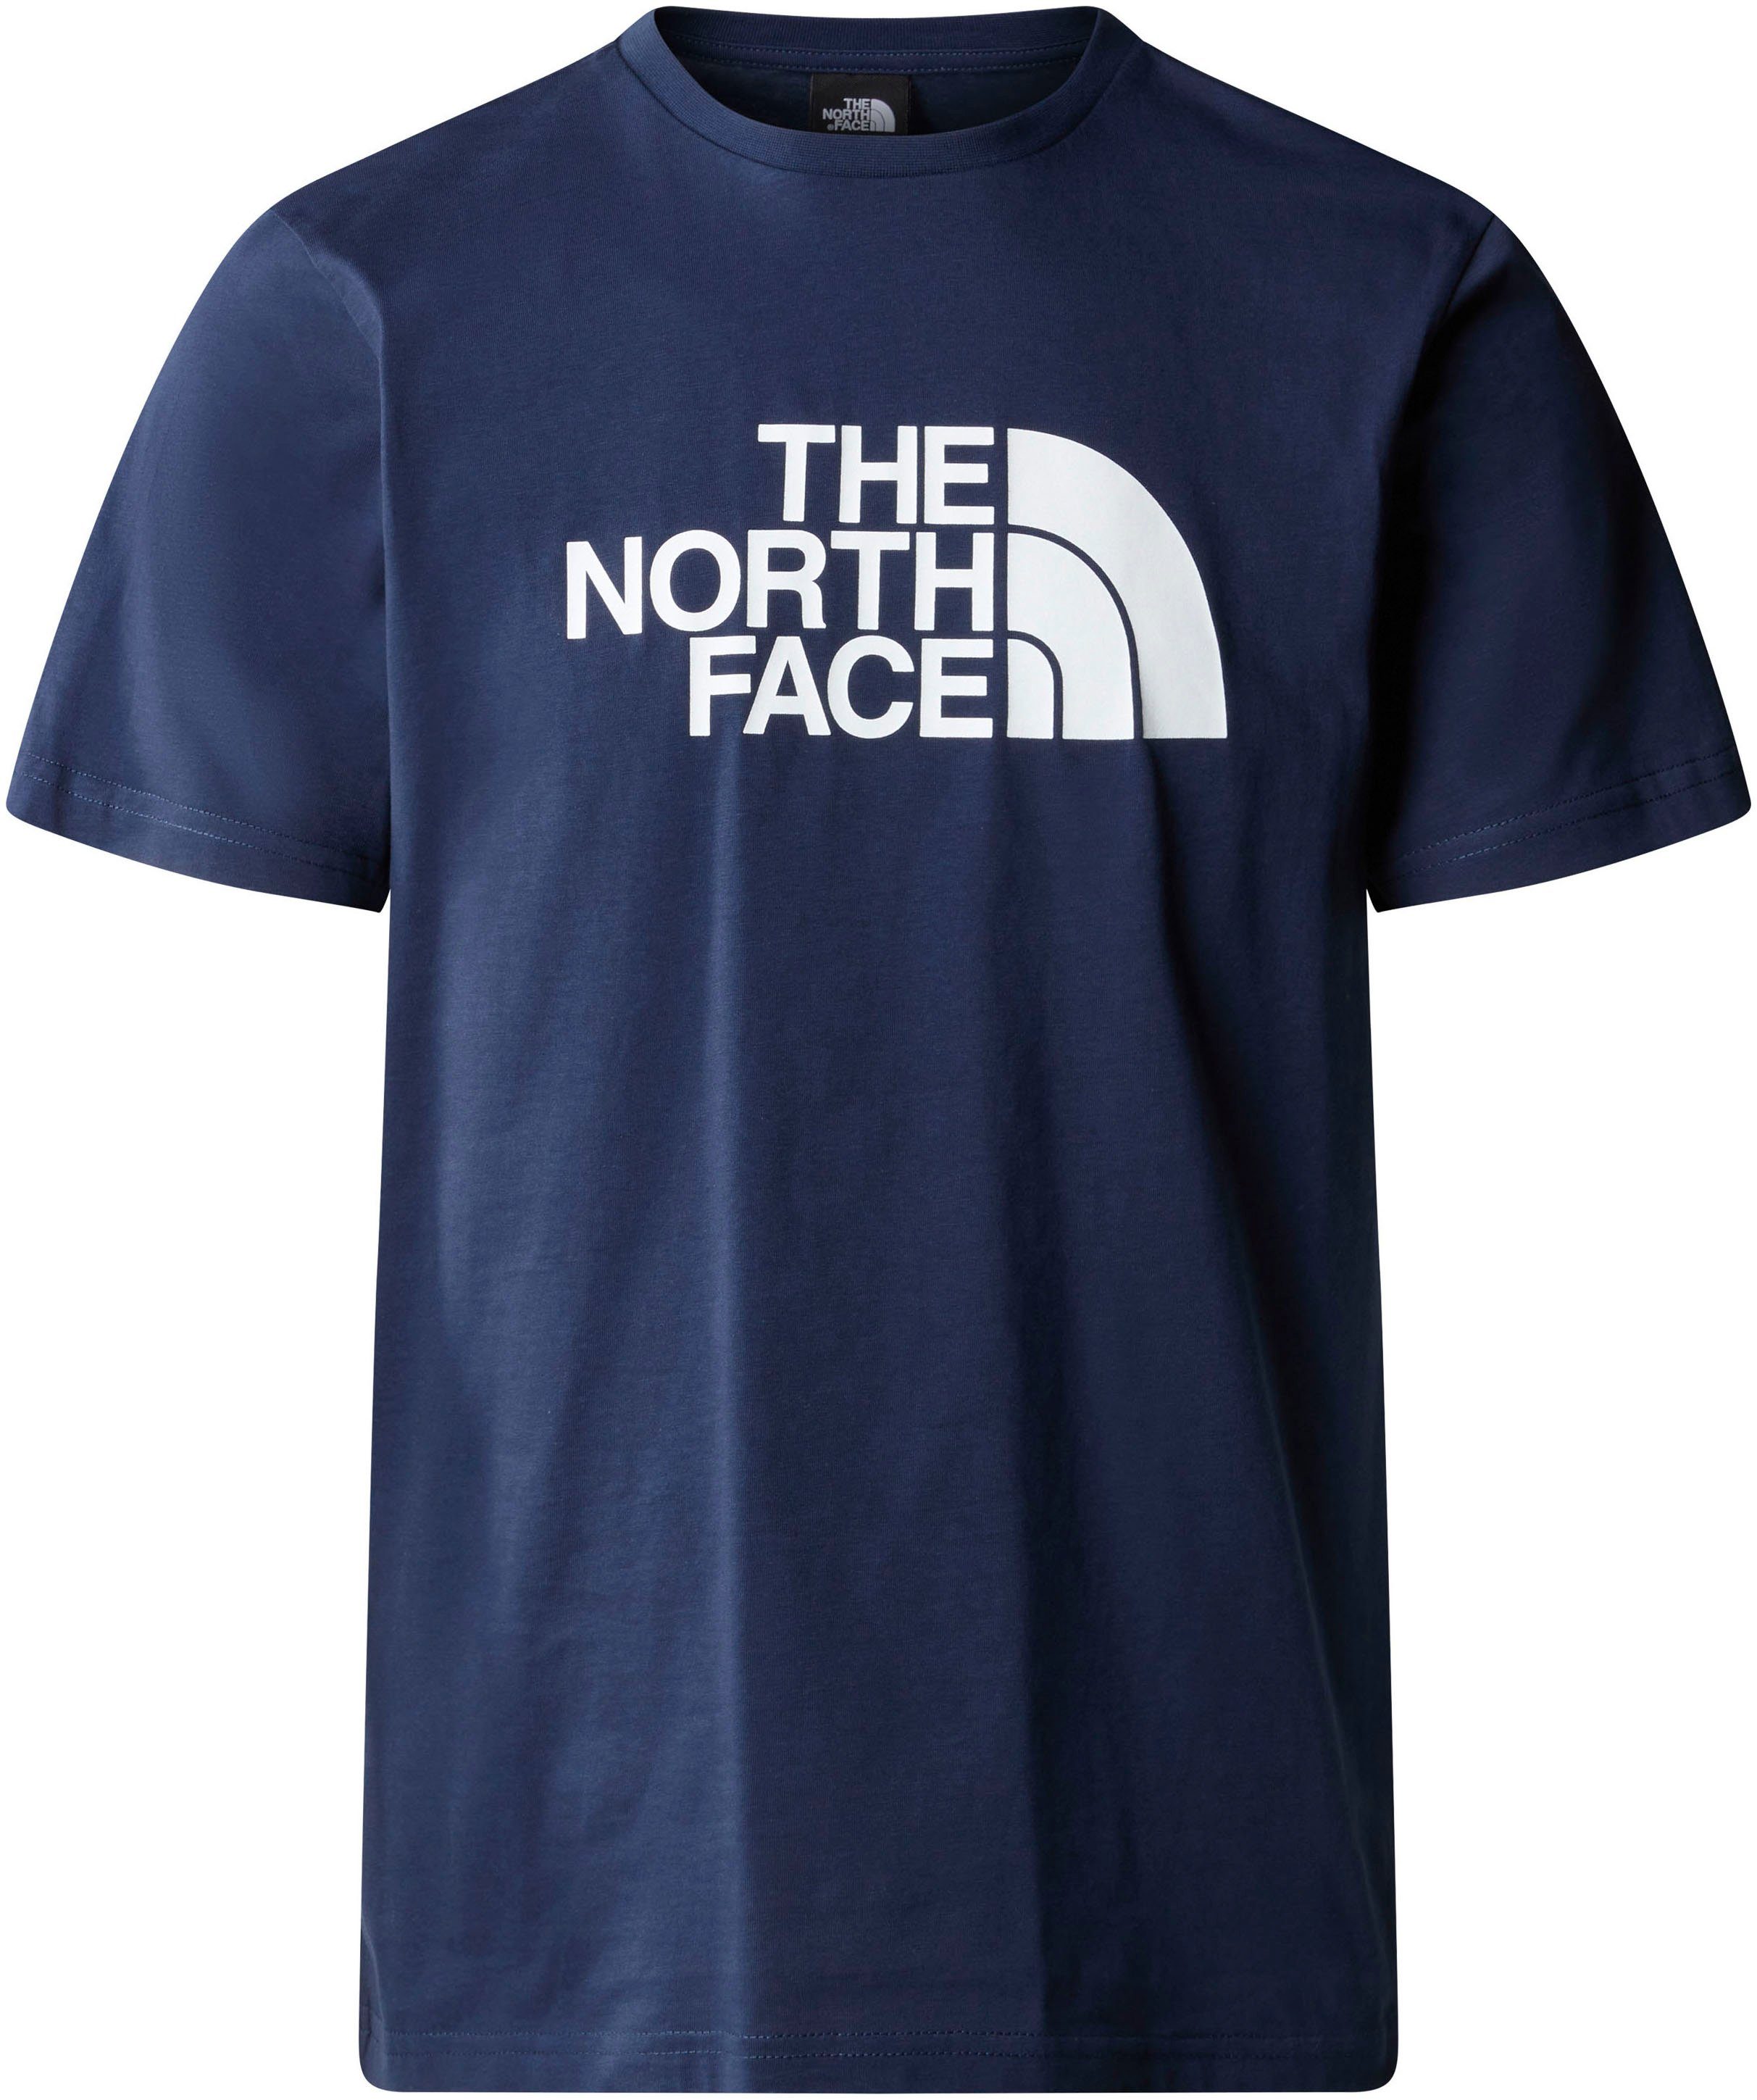 S/S North TEE Face EASY M The T-Shirt